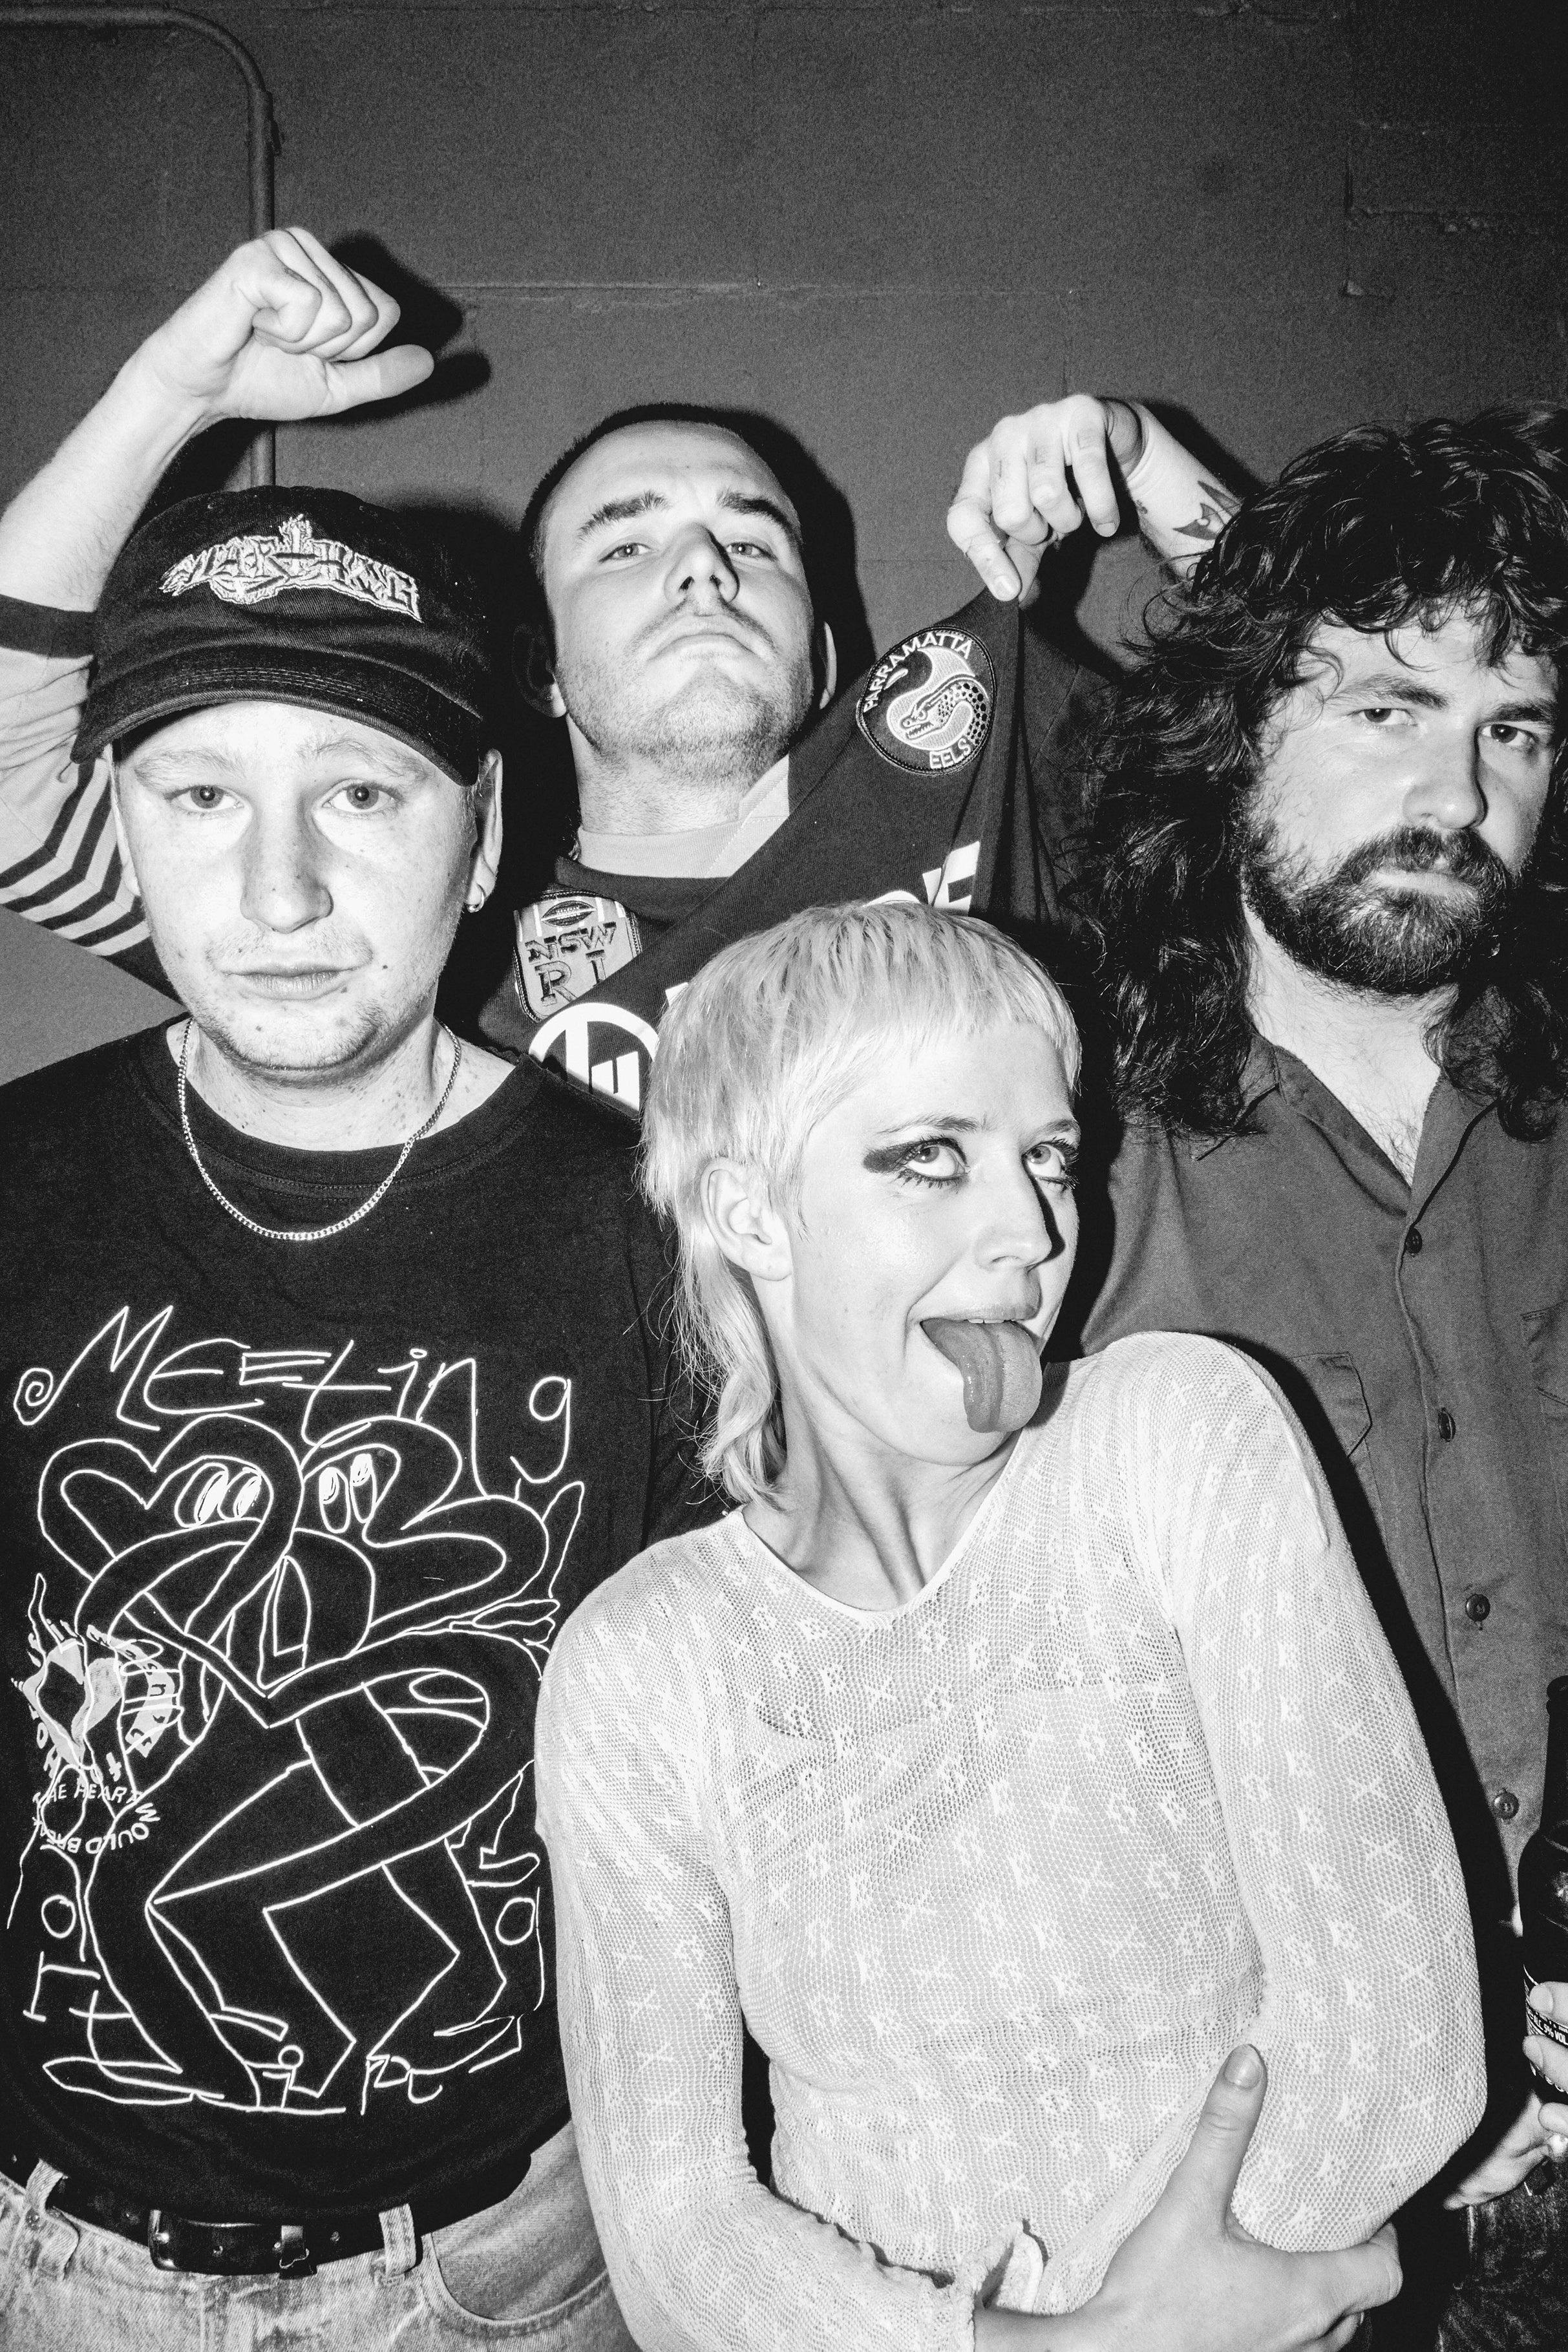 Amyl and the Sniffers, Die Spitz at Tioga Sequoia Brewery